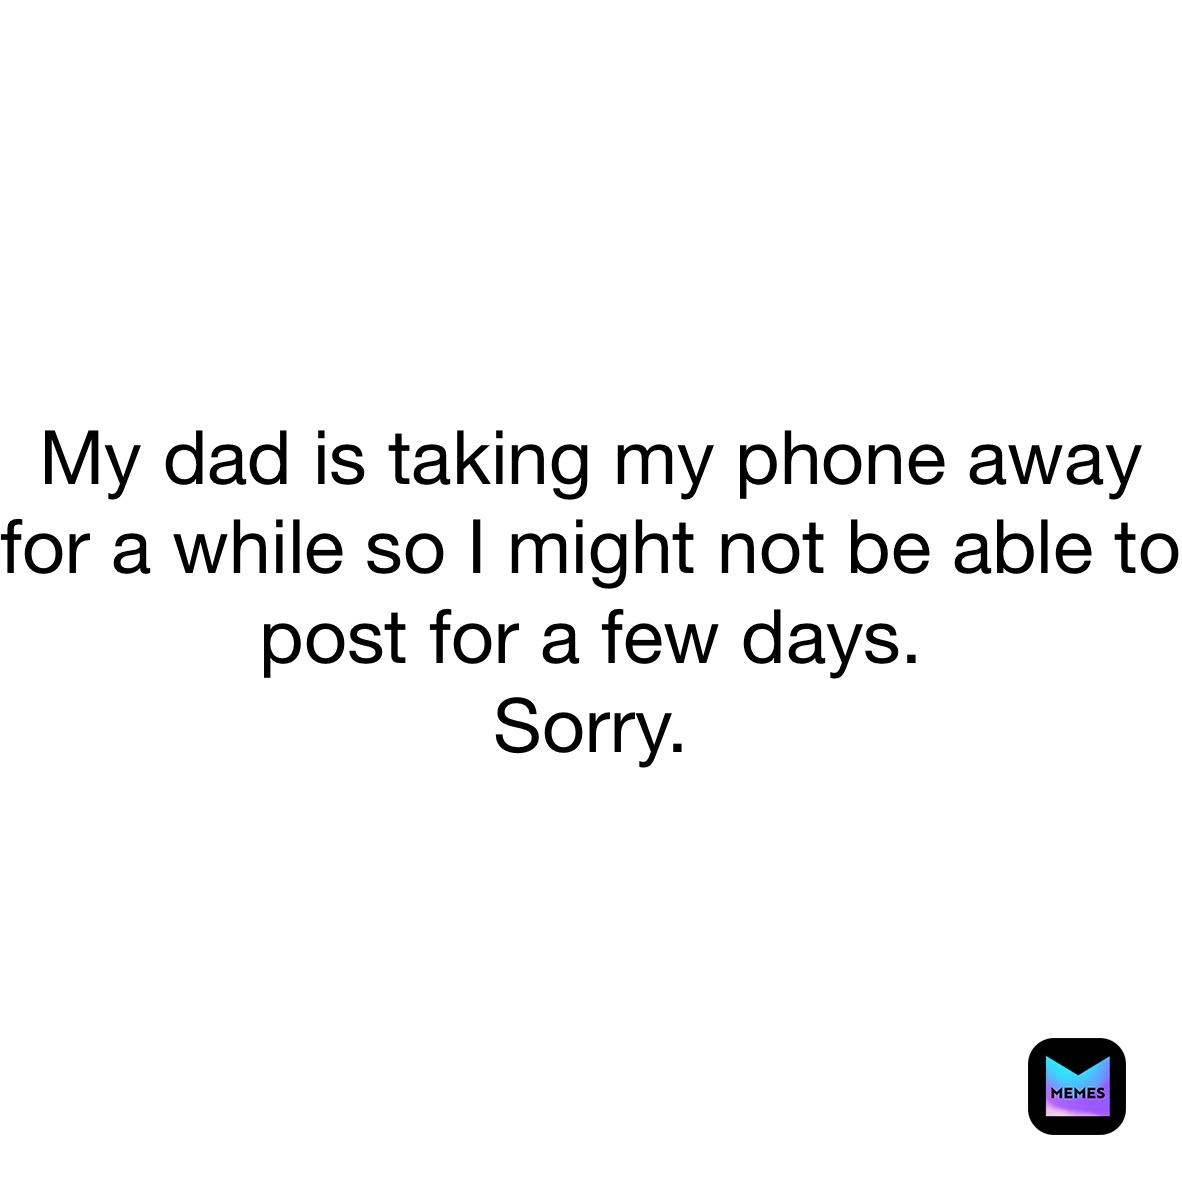 My dad is taking my phone away for a while so I might not be able to post for a few days.
Sorry. 